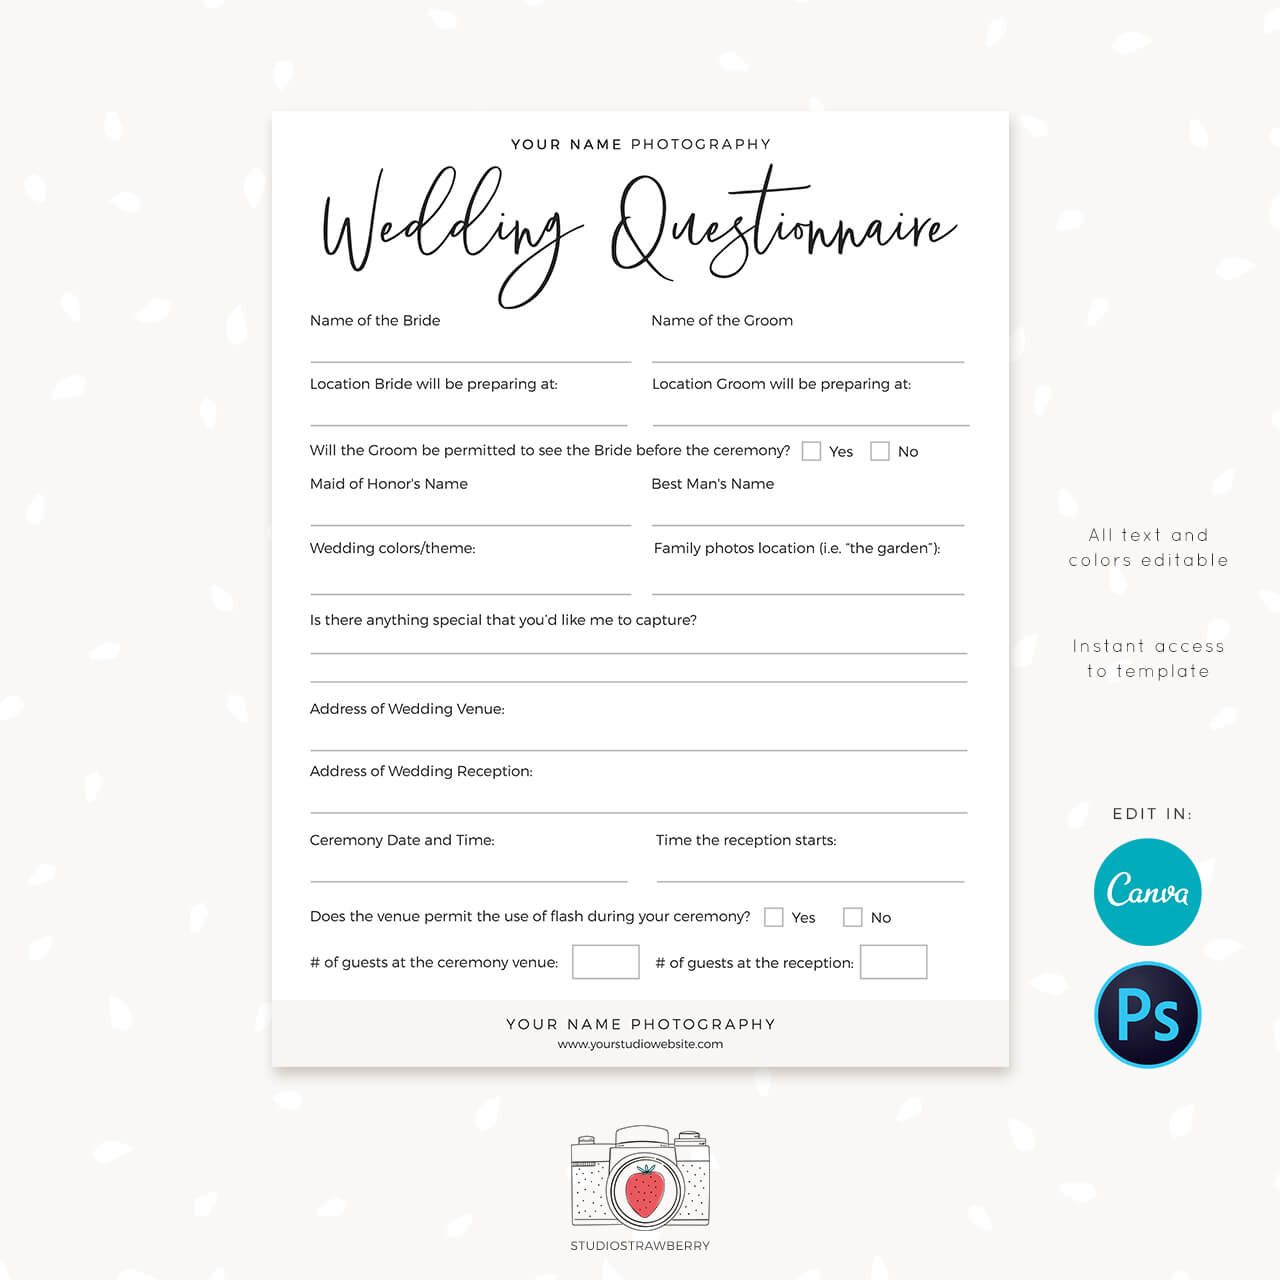 Wedding photography questionnaire template – Strawberry Kit